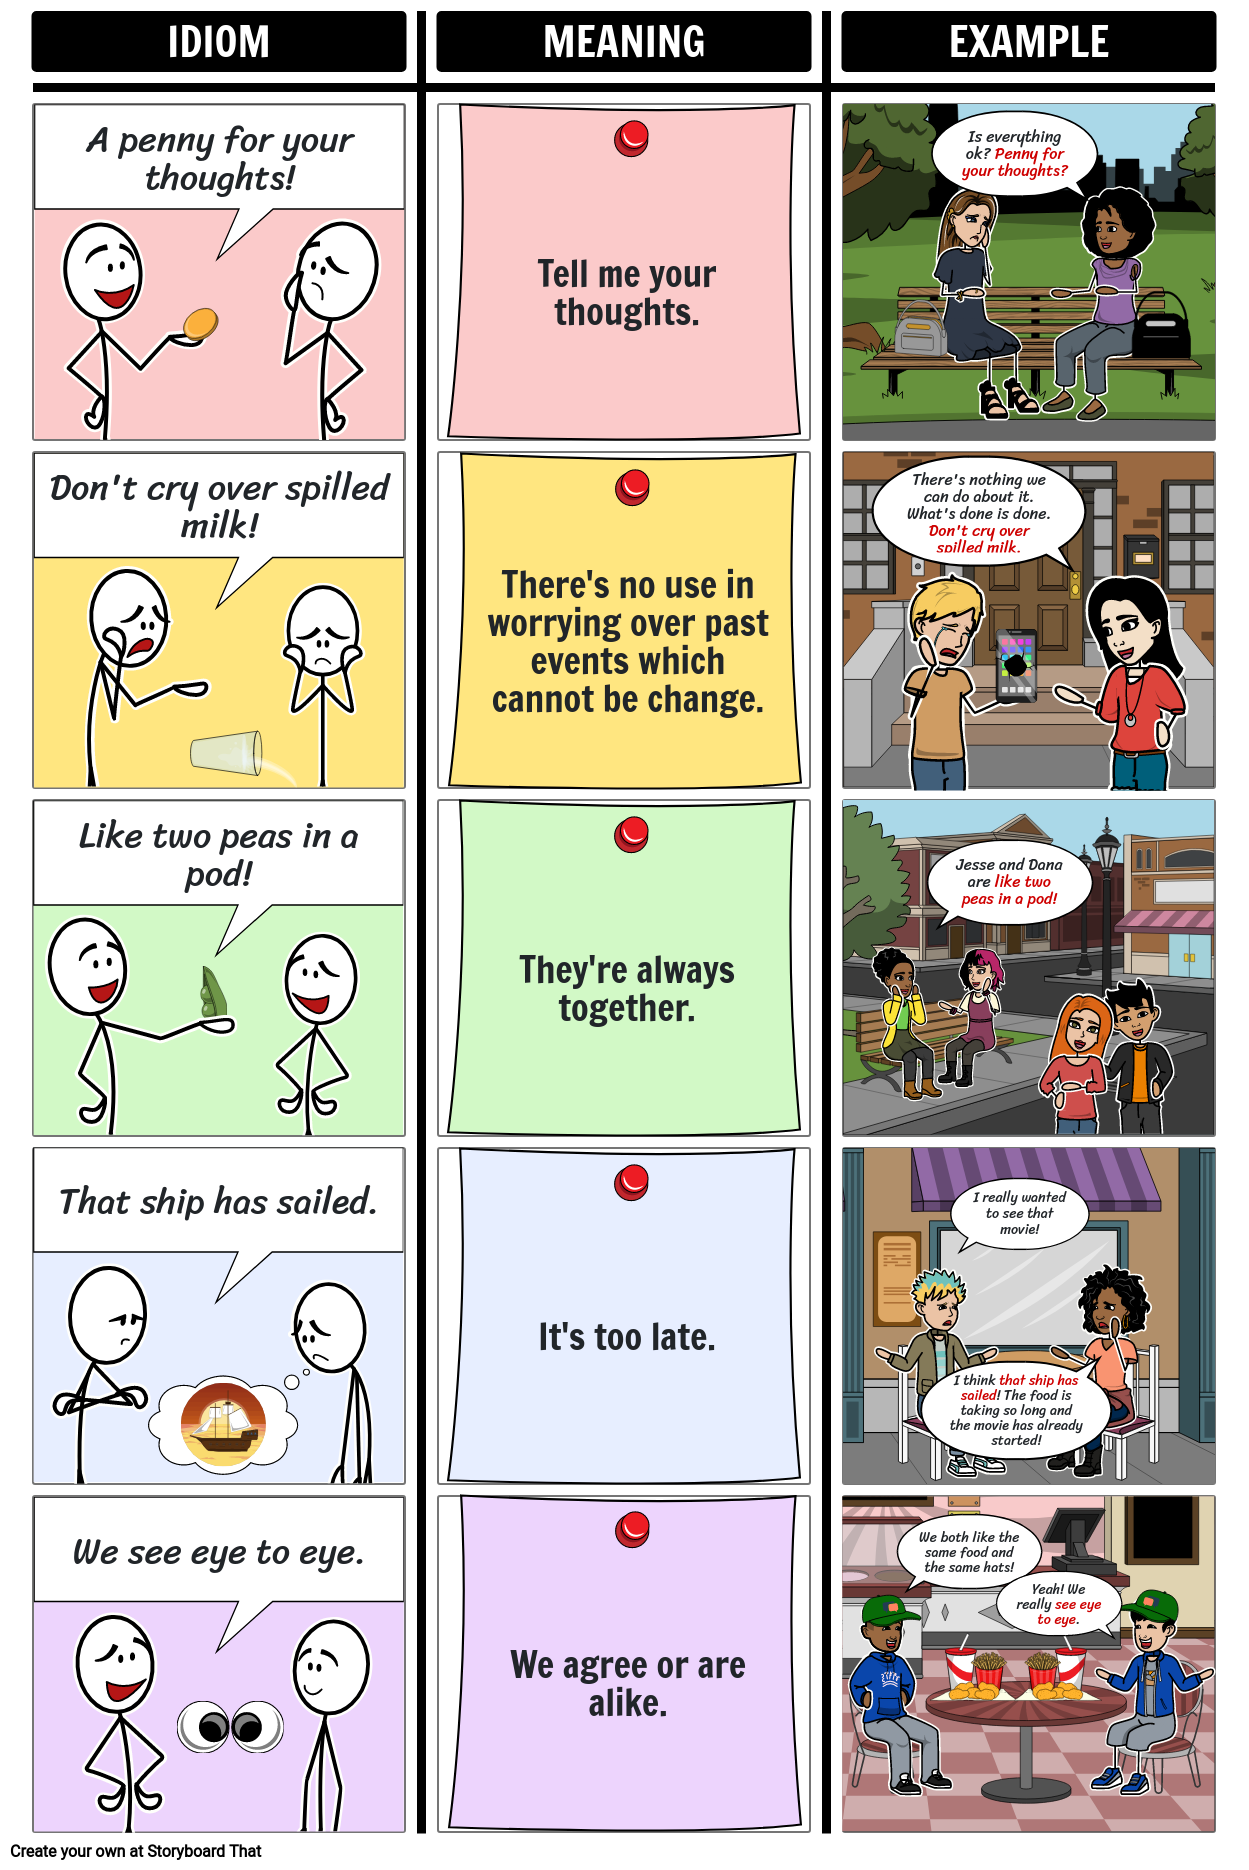 expressions-idiomatiques-en-anglais-storyboard